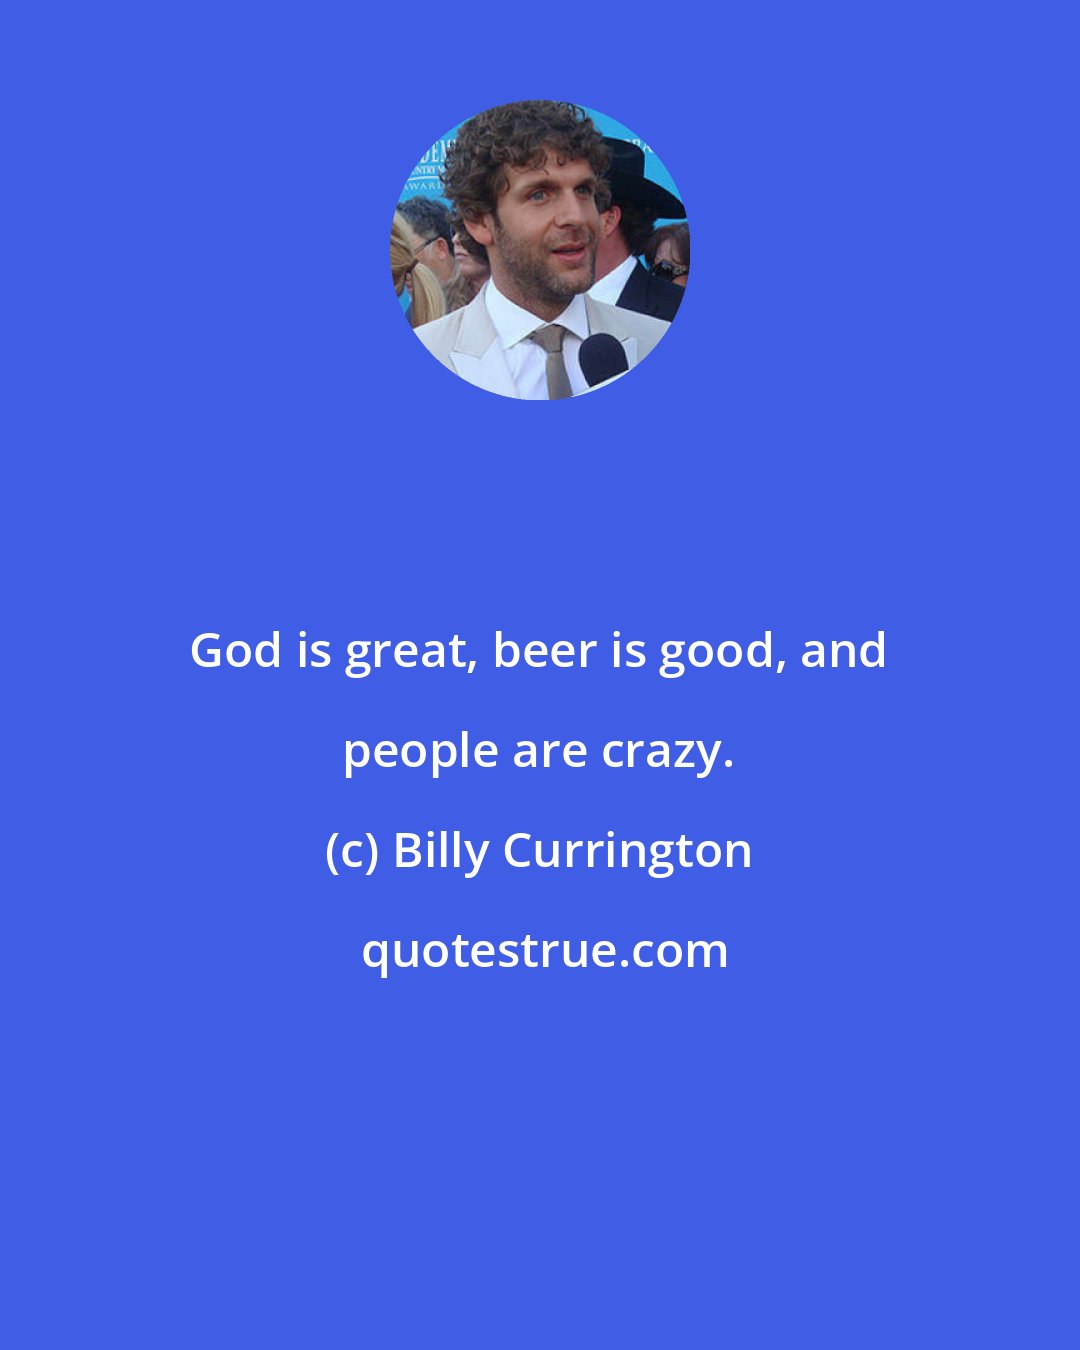 Billy Currington: God is great, beer is good, and people are crazy.